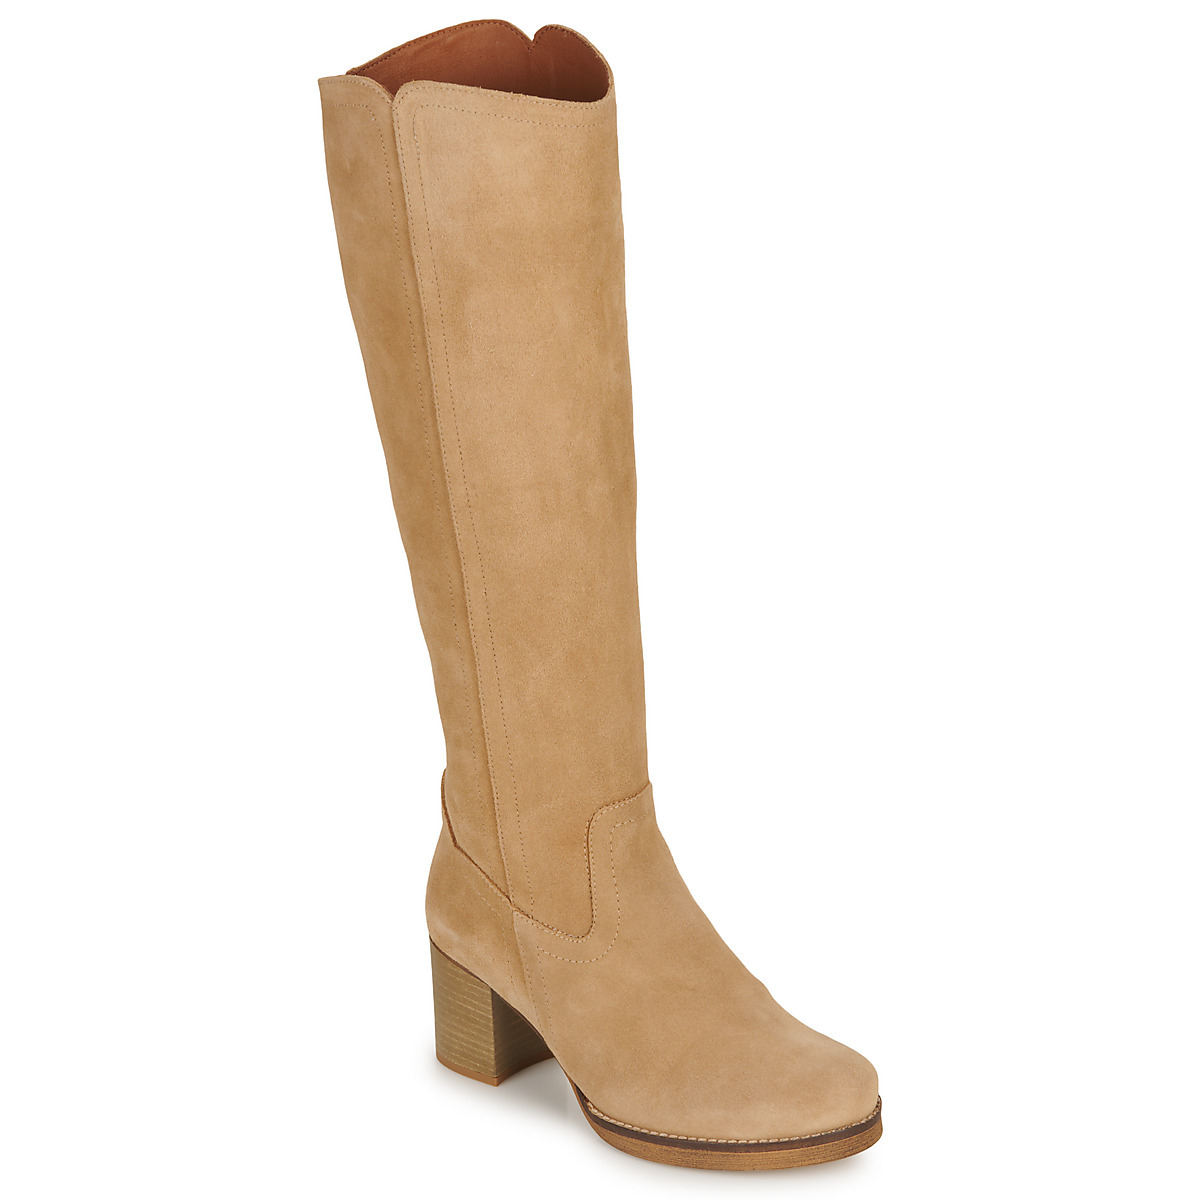 Boots Beige for Women from Spartoo GOOFASH